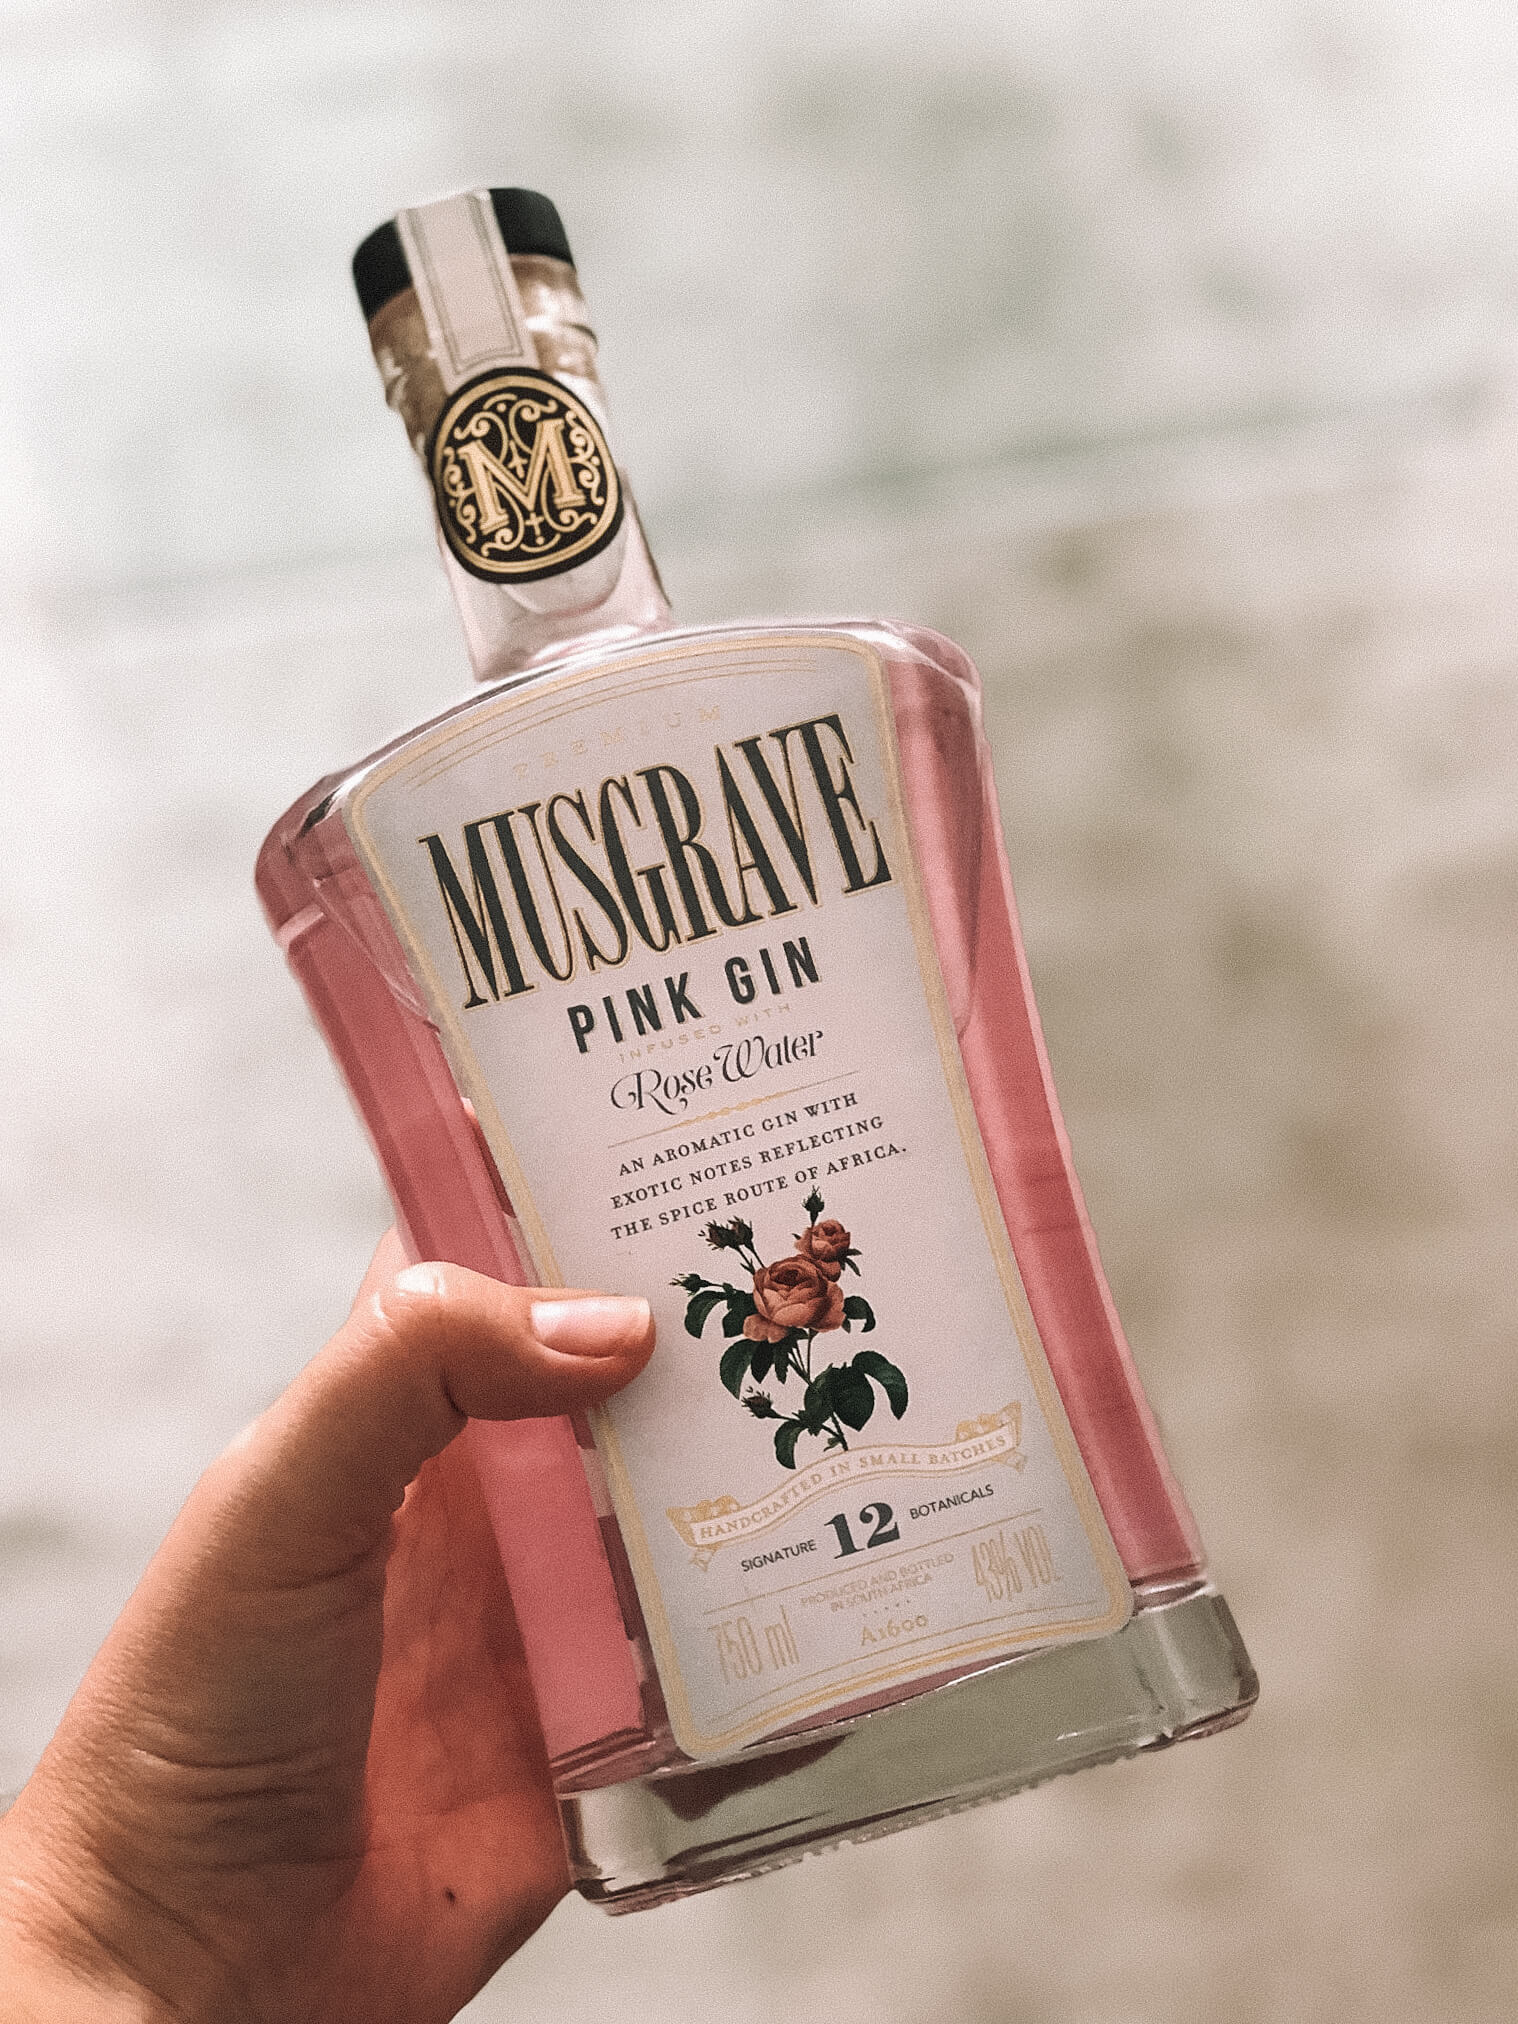 Musgrave Pink Gin in Cape Town